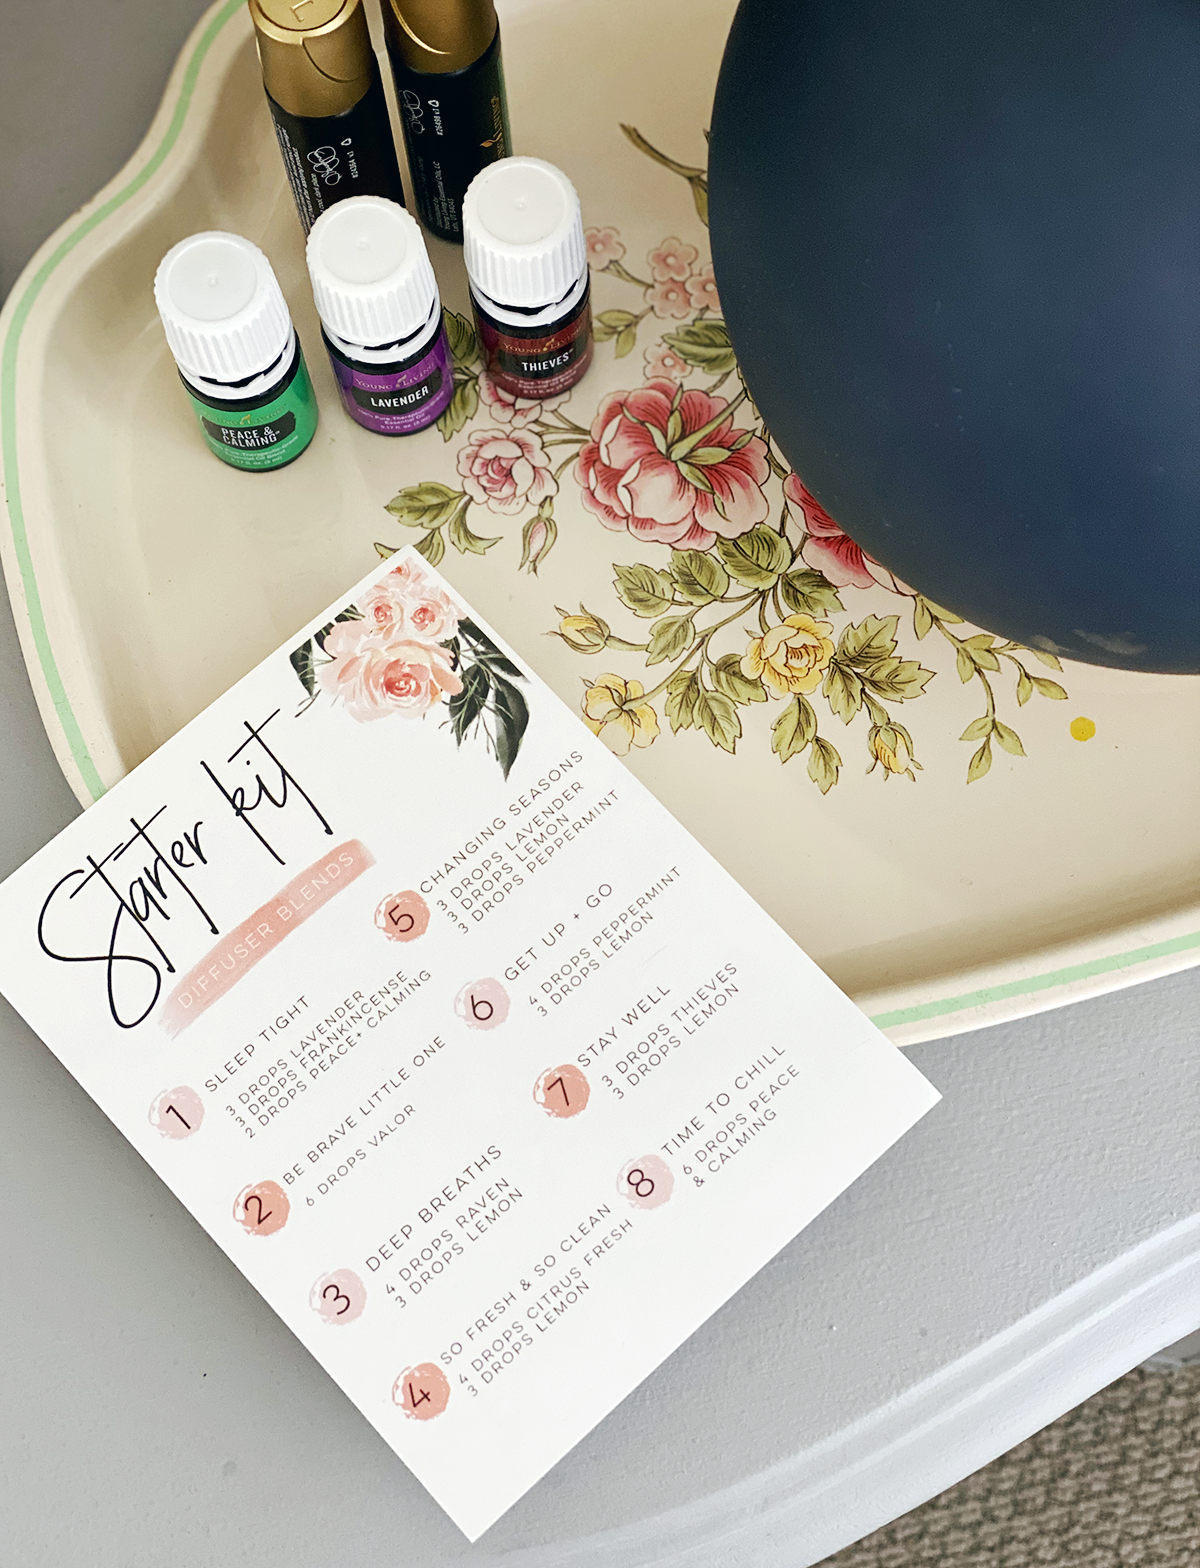 Diffuser blends using a Young Living Starter Kit